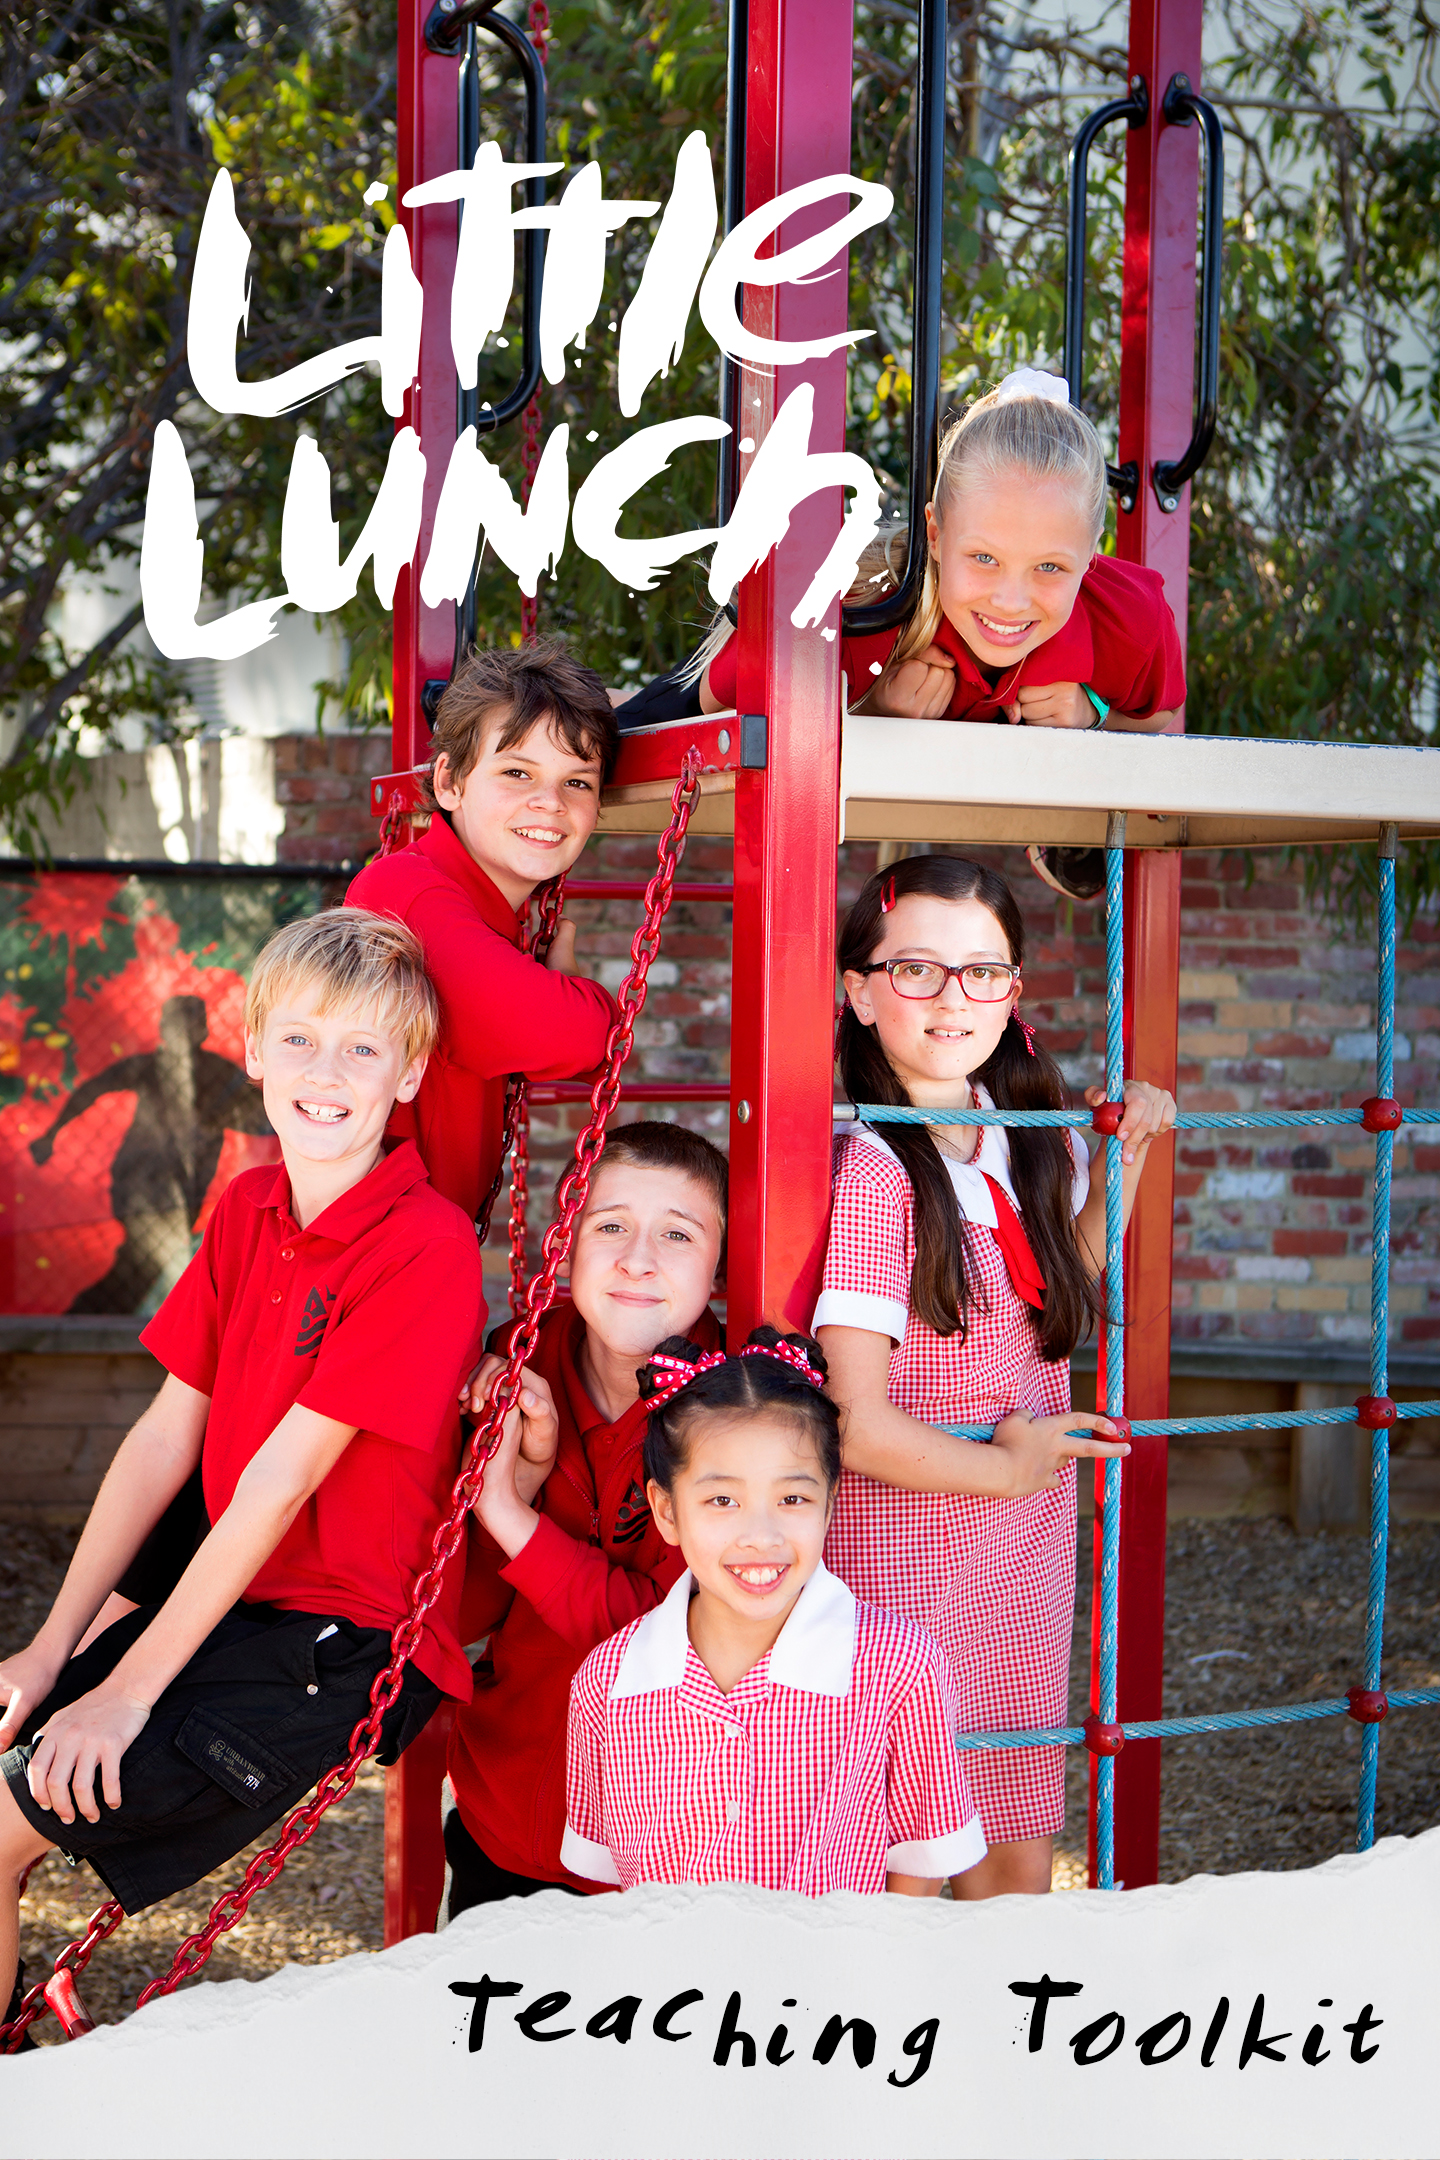 10395-little-lunch-curriculum-resource-for-english